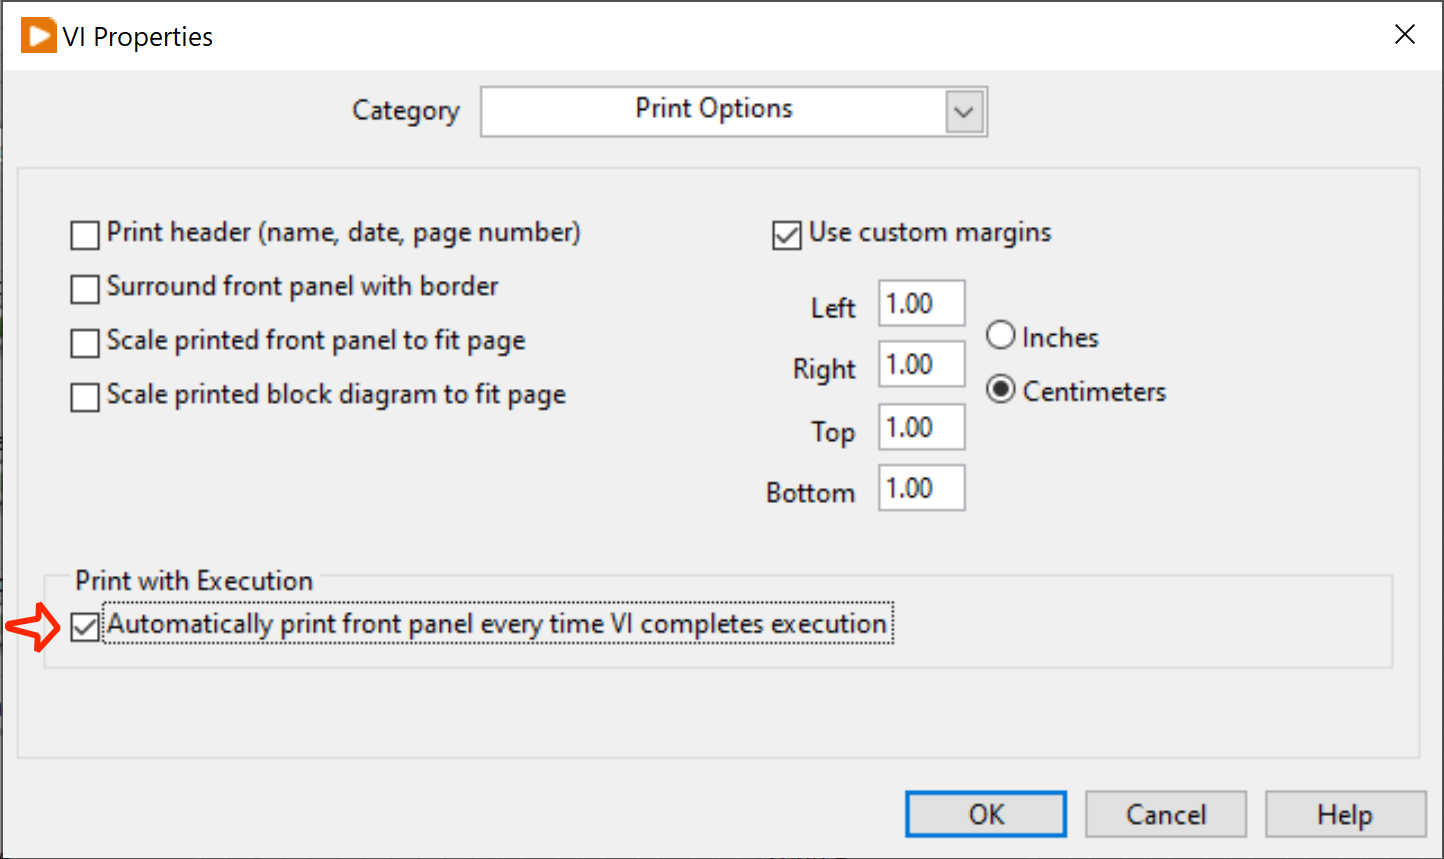 VI Properties dialog showing Print with Execution turned on.  Tickbox description is Automatically print front panel every time VI completes execution